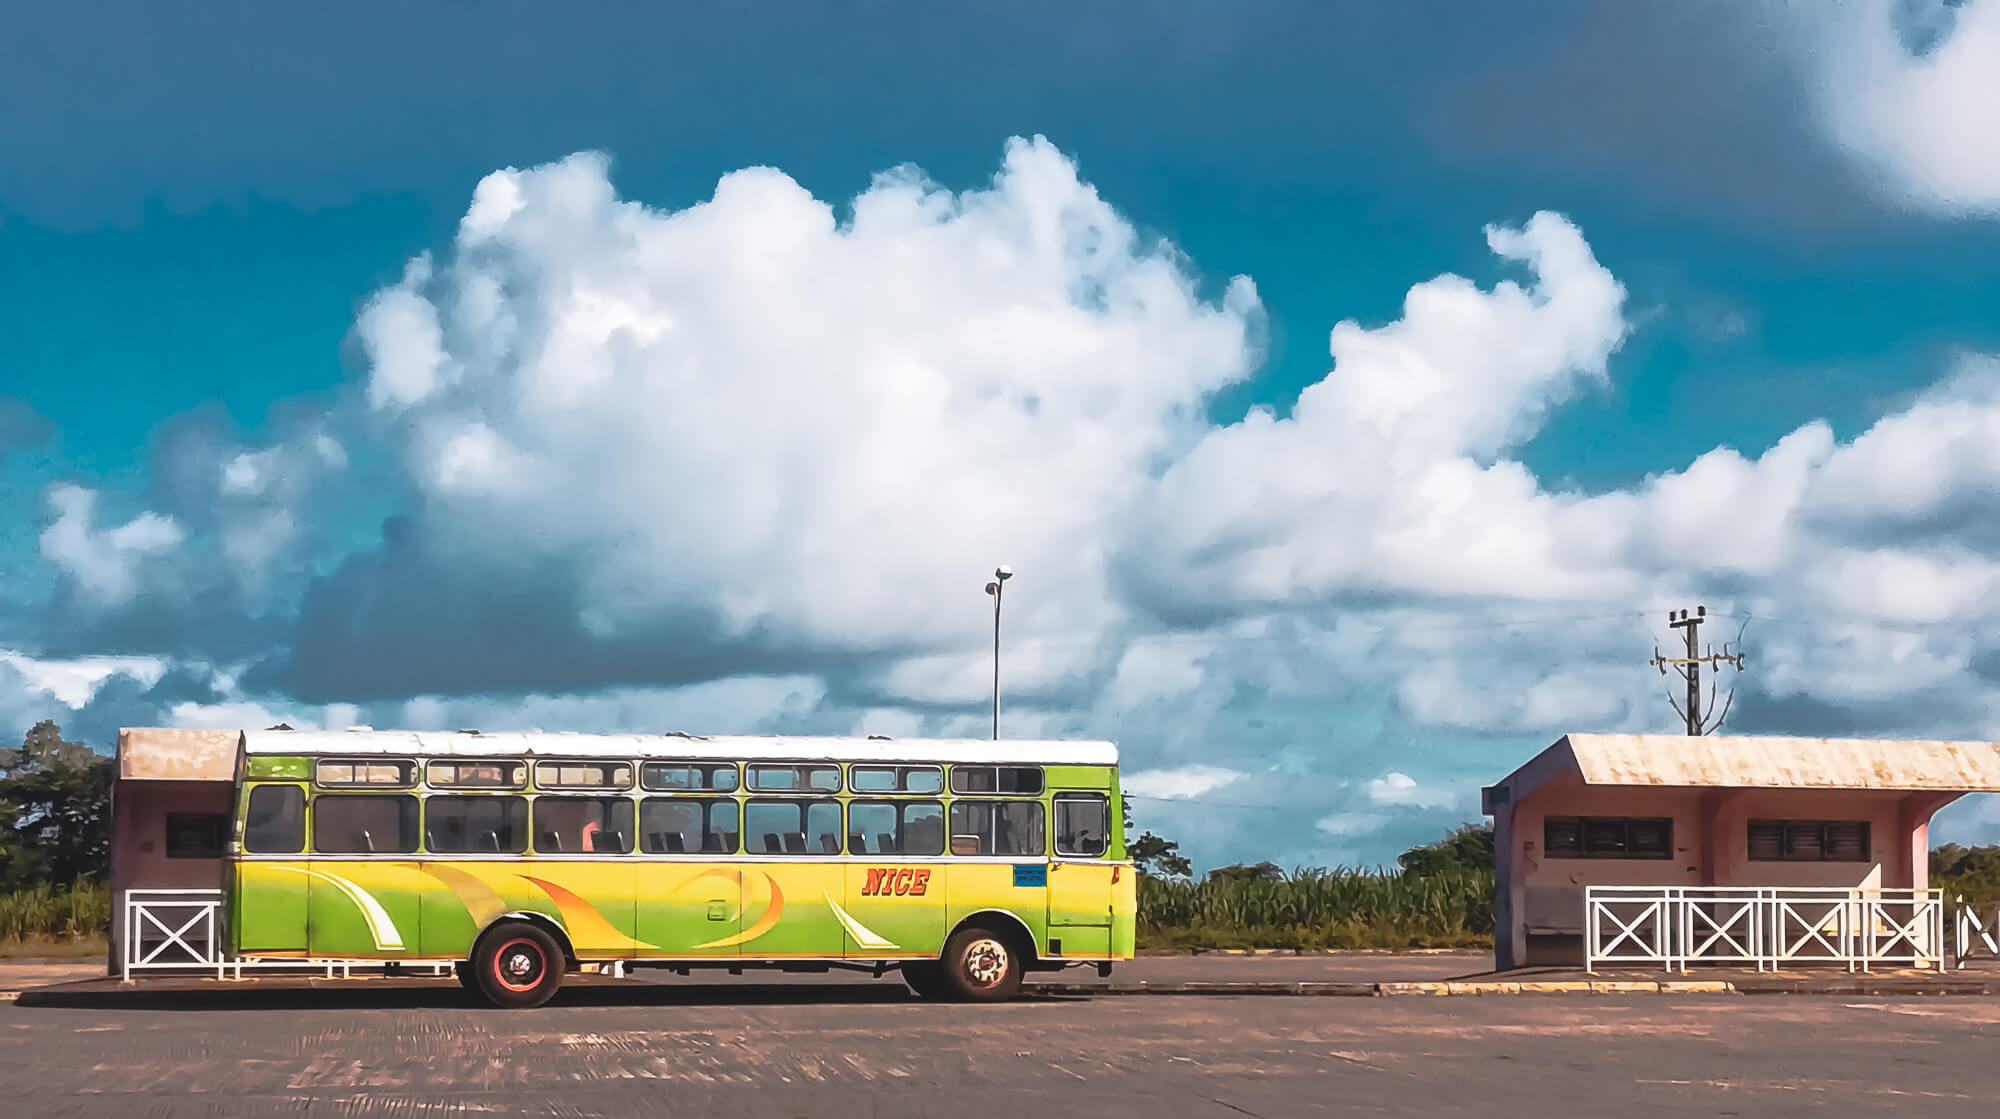 A colourful bus in Mauritius waiting to start its trip